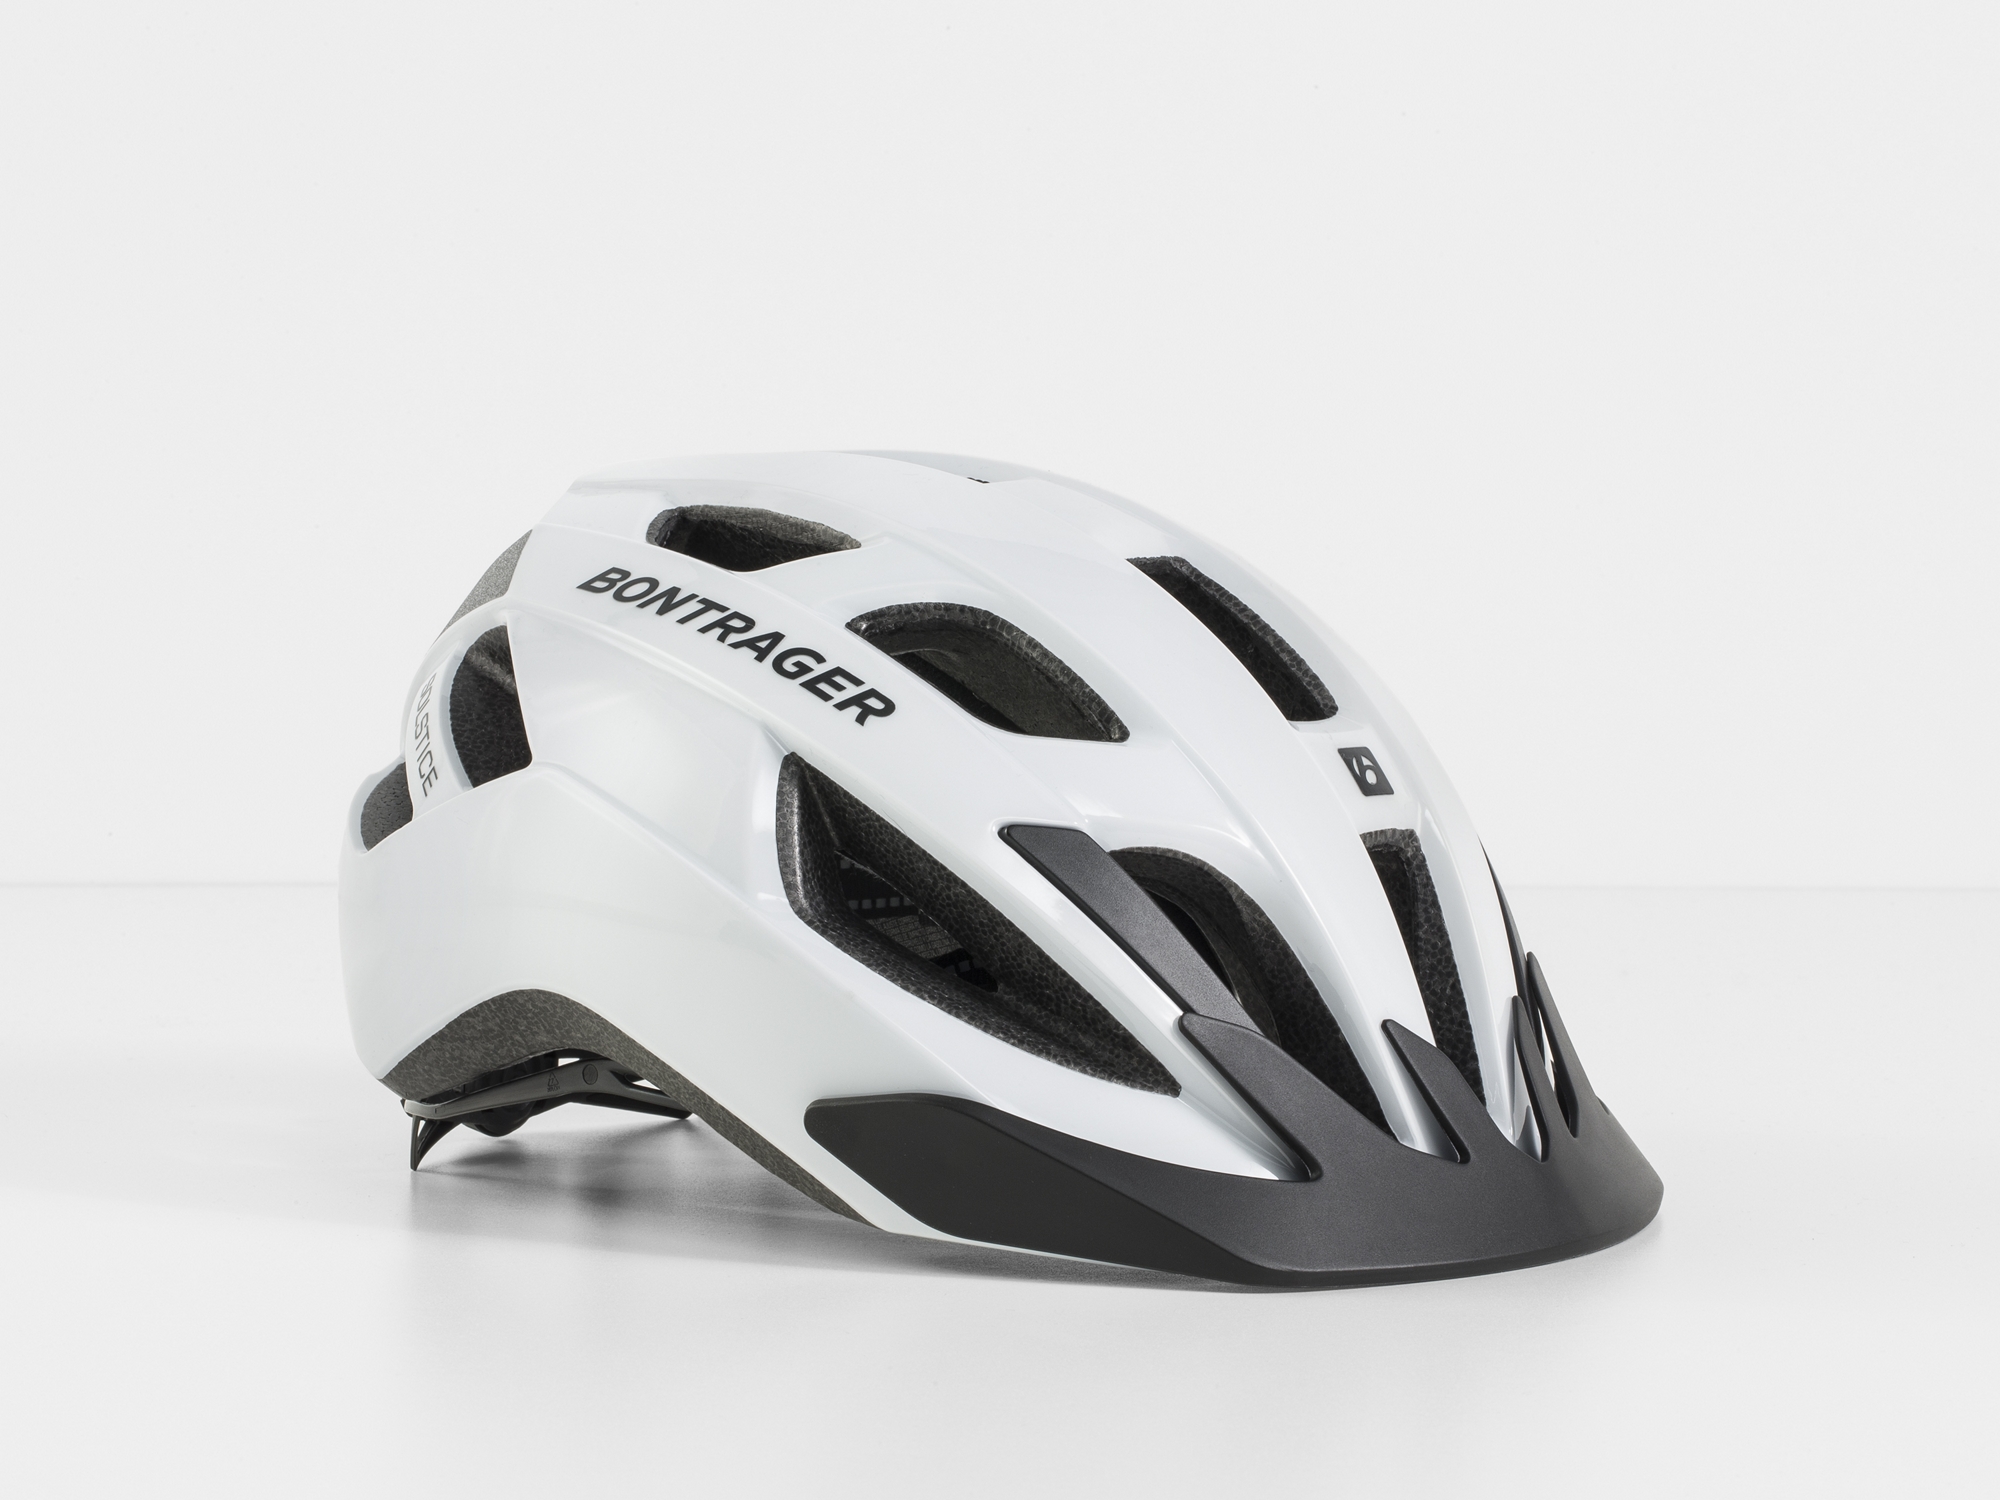 <a href="https://cycles-clement.be/product/casque-bont-solstice-s-m-white-ce/">CASQUE BONT SOLSTICE  S/M WHITE CE</a>